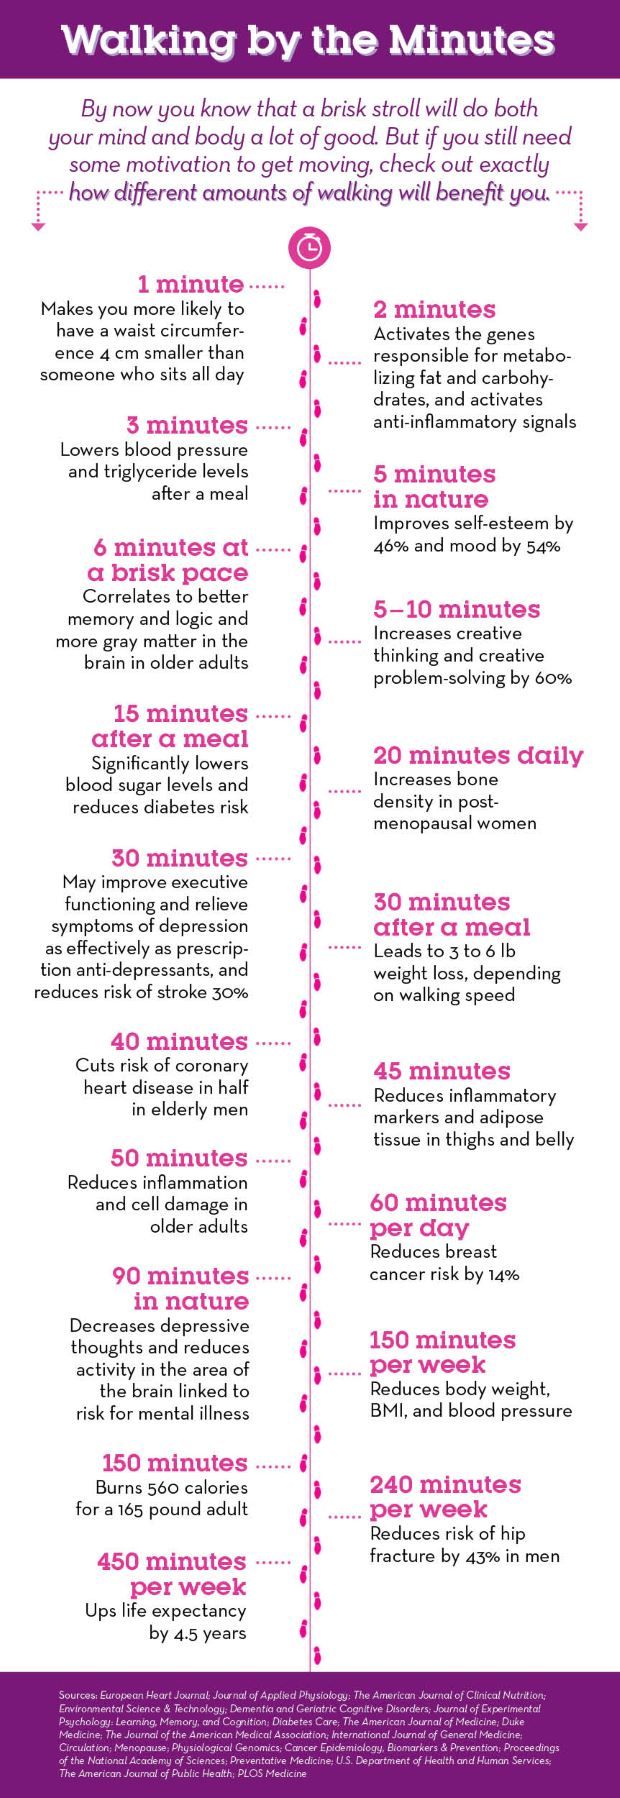 Walking by the minutes infographic